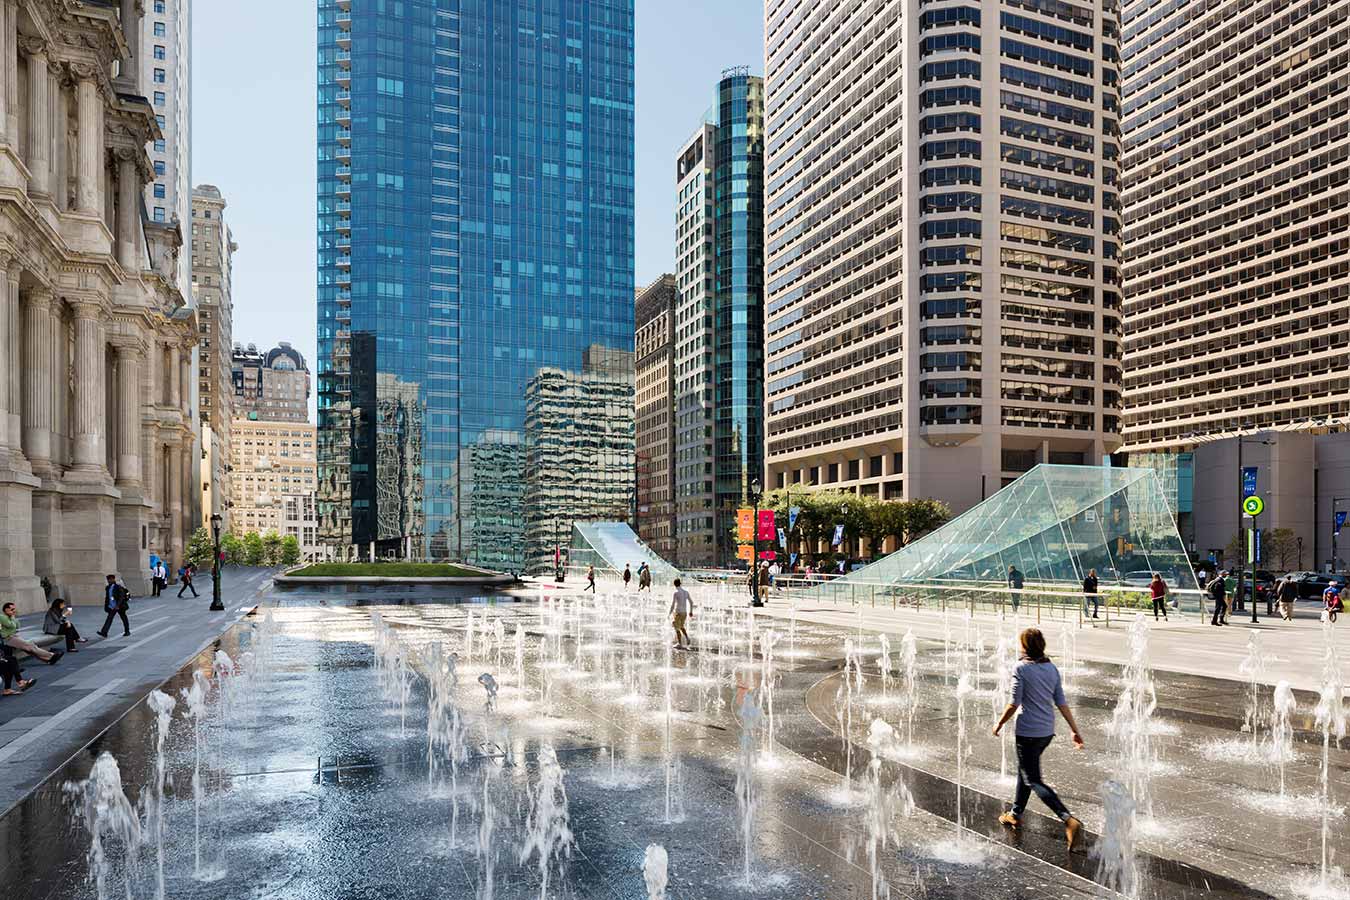 <p>The programmable fountain can be turned partially or completely off, allowing for a broad range of civic and cultural activity, including green markets, concerts, and ice skating in winter. <br><small>&copy; James Ewing Photography</small></p>